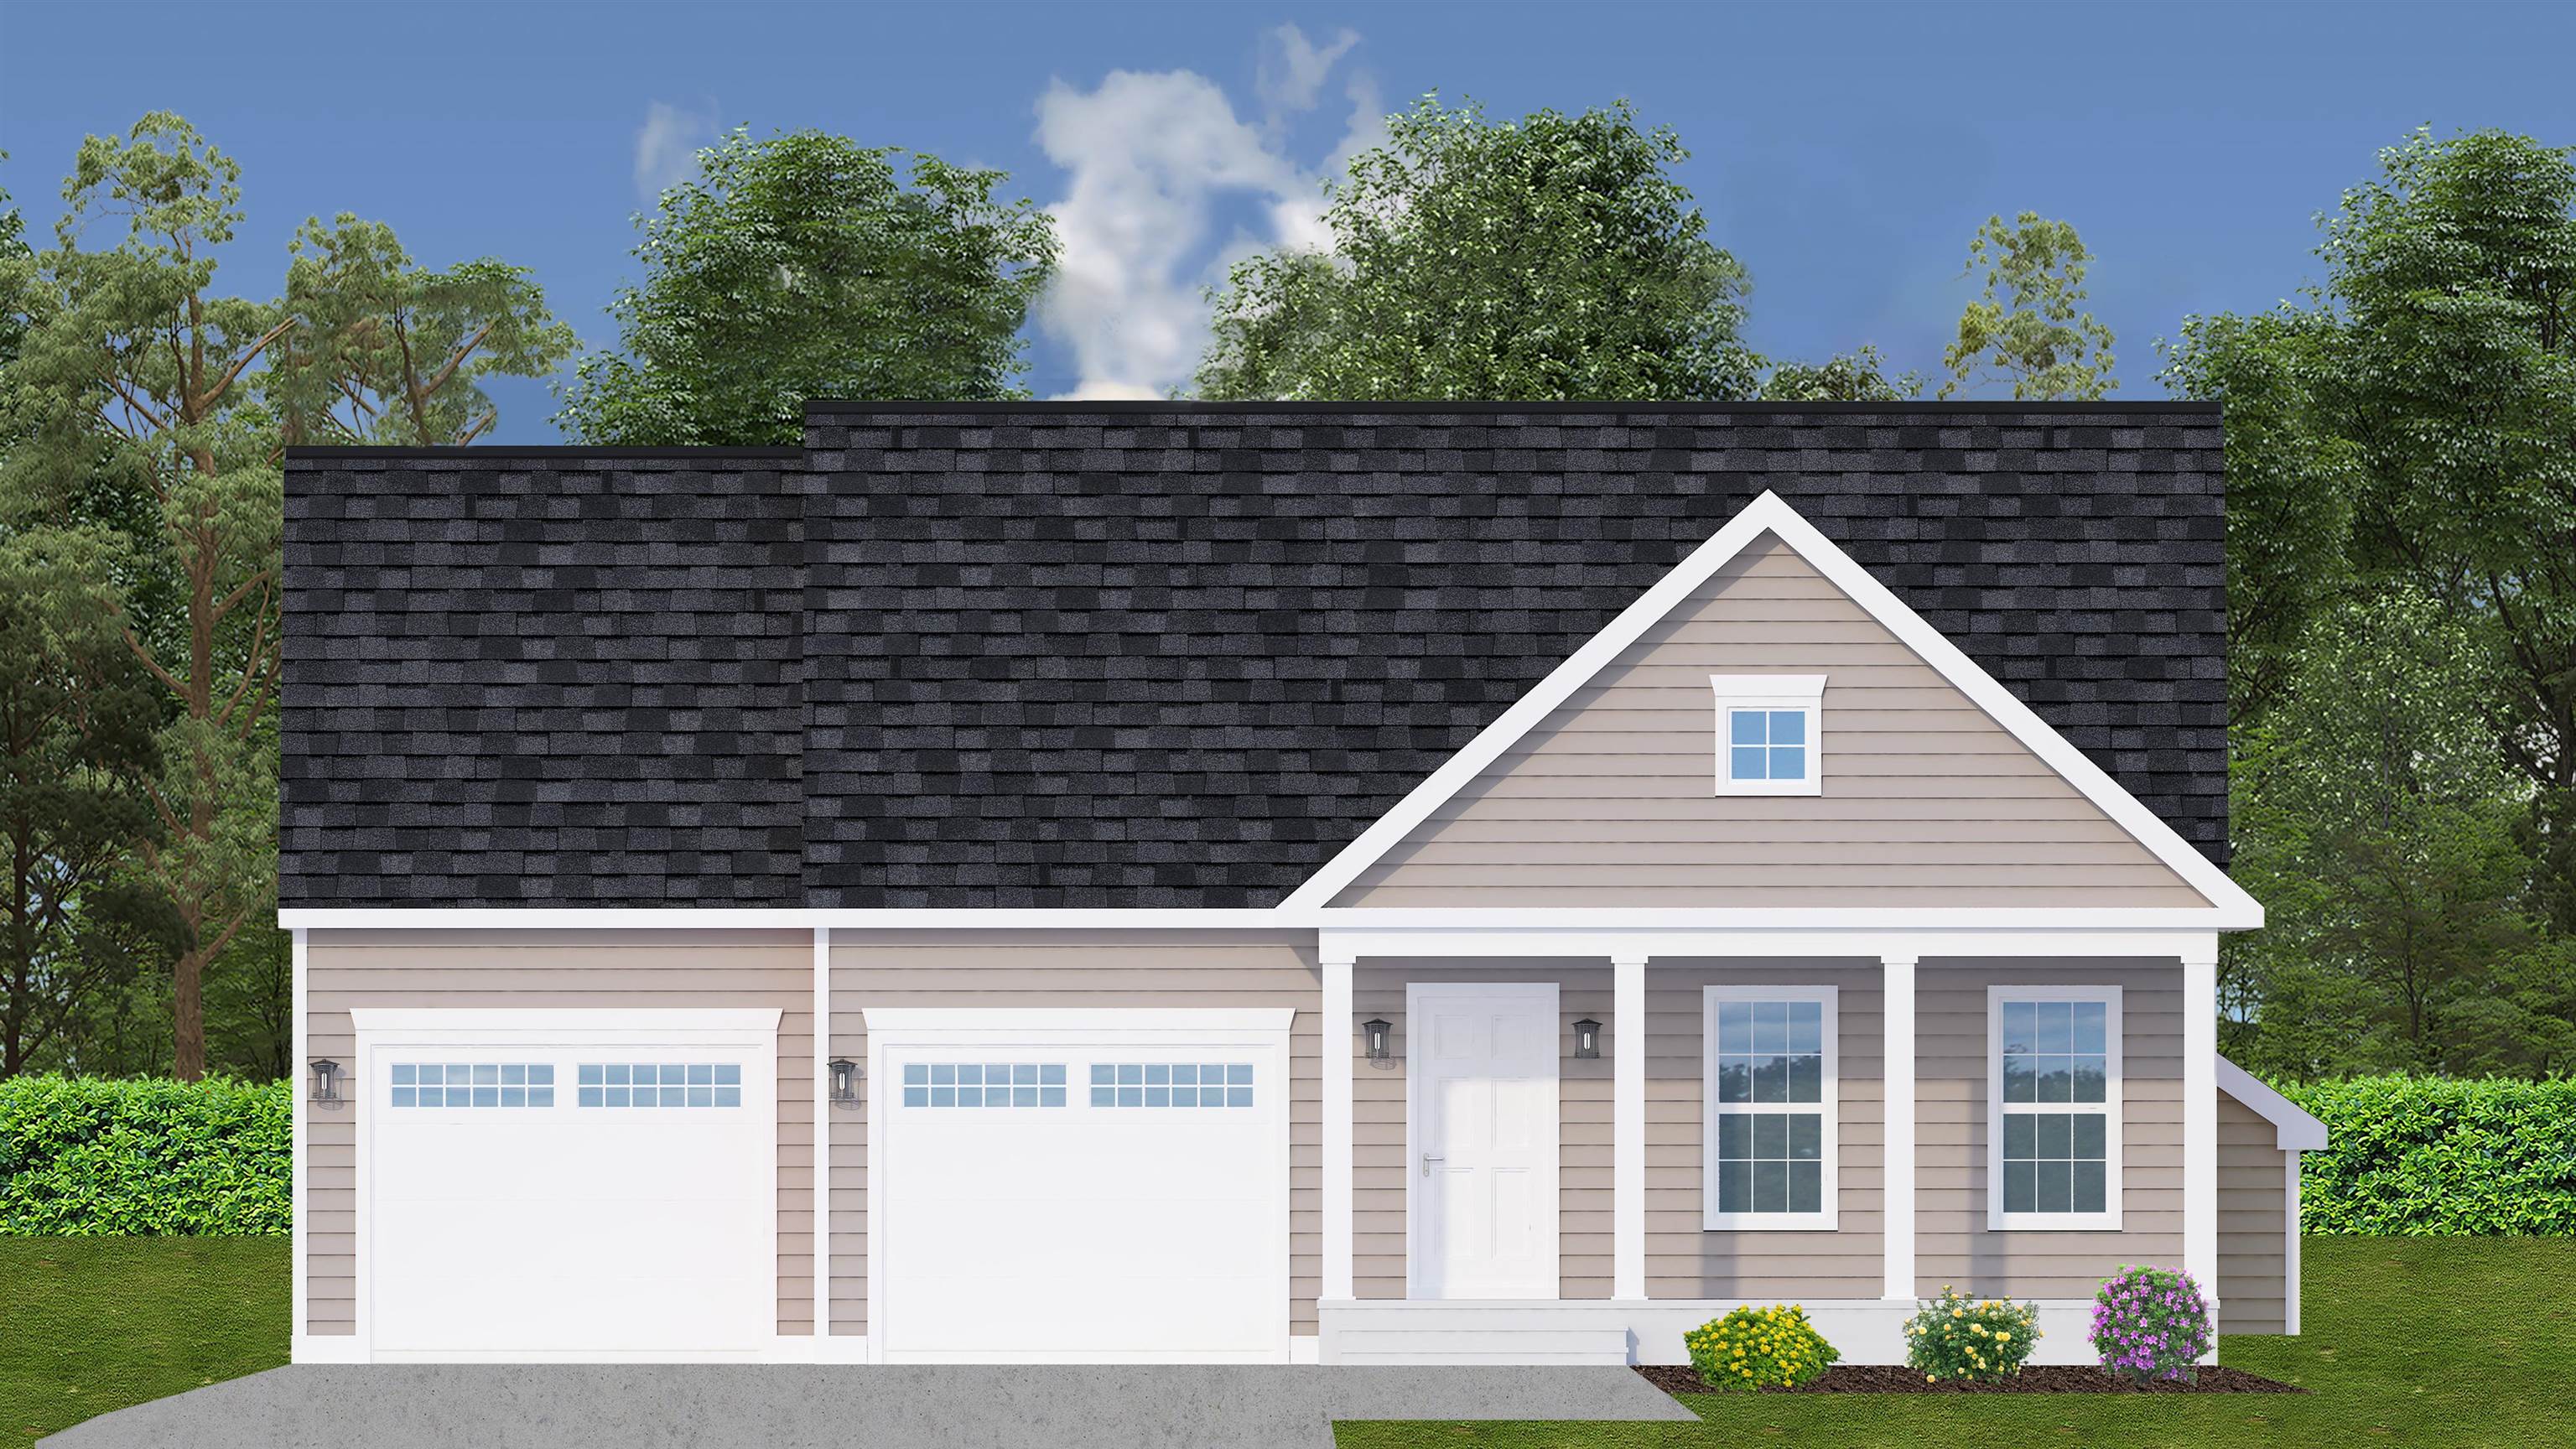 THE RANCH STYLE MODEL with 1,656 sq.ft. of living space is one of SADDLEBACK ESTATES home plan offerings! We are located in South Nashua! Walking distance to Rivier University and The Nashua Country Club  This is an 11-lot subdivision cul-de-sac community that is certainly to be in demand.  (To check out the cul-de-sac location GPS 36 Fifield Rd Nashua NH  The road is now paved and construction is beginning. Delivery date of the homes is 5-6 months from signing of contract to purchase. We do have an offsite model home available for your viewing or you can view what your new homes fit and finish will look lite completed. or view our video tour posted in this listing.) There are several additional floor plans to choose but if a Ranch is for you then you can select from other ranch plans as well.  (LITTLE KNOWN FACT: DID YOU KNOW THAT A 1,700 SQ. FT. RANCH HAS THE SAME FELL OF A 2,000 SQ.FT. TWO STORY HOME DUE TO THE RANCH NOT HAVING HALLWAYS AND A STAIRWAY TO THE 2ND FLOOR THAT TAKE AWAY FROM THE TOTAL ACTUAL LIVING SPACE!).      All our homes contains all that you expect to have in your dream home. Open floor plans, Hardwood in all rooms except bedrooms with option for hardwood throughout!  Tile bathroom flooring, Separate laundry room in some models, gas fireplace included in all with a 12'x12' composite deck off the Dining area . Granite counter tops. Come pick your lot and  pick your style of home watch us build your dream home.   (all photos are facsimiles)